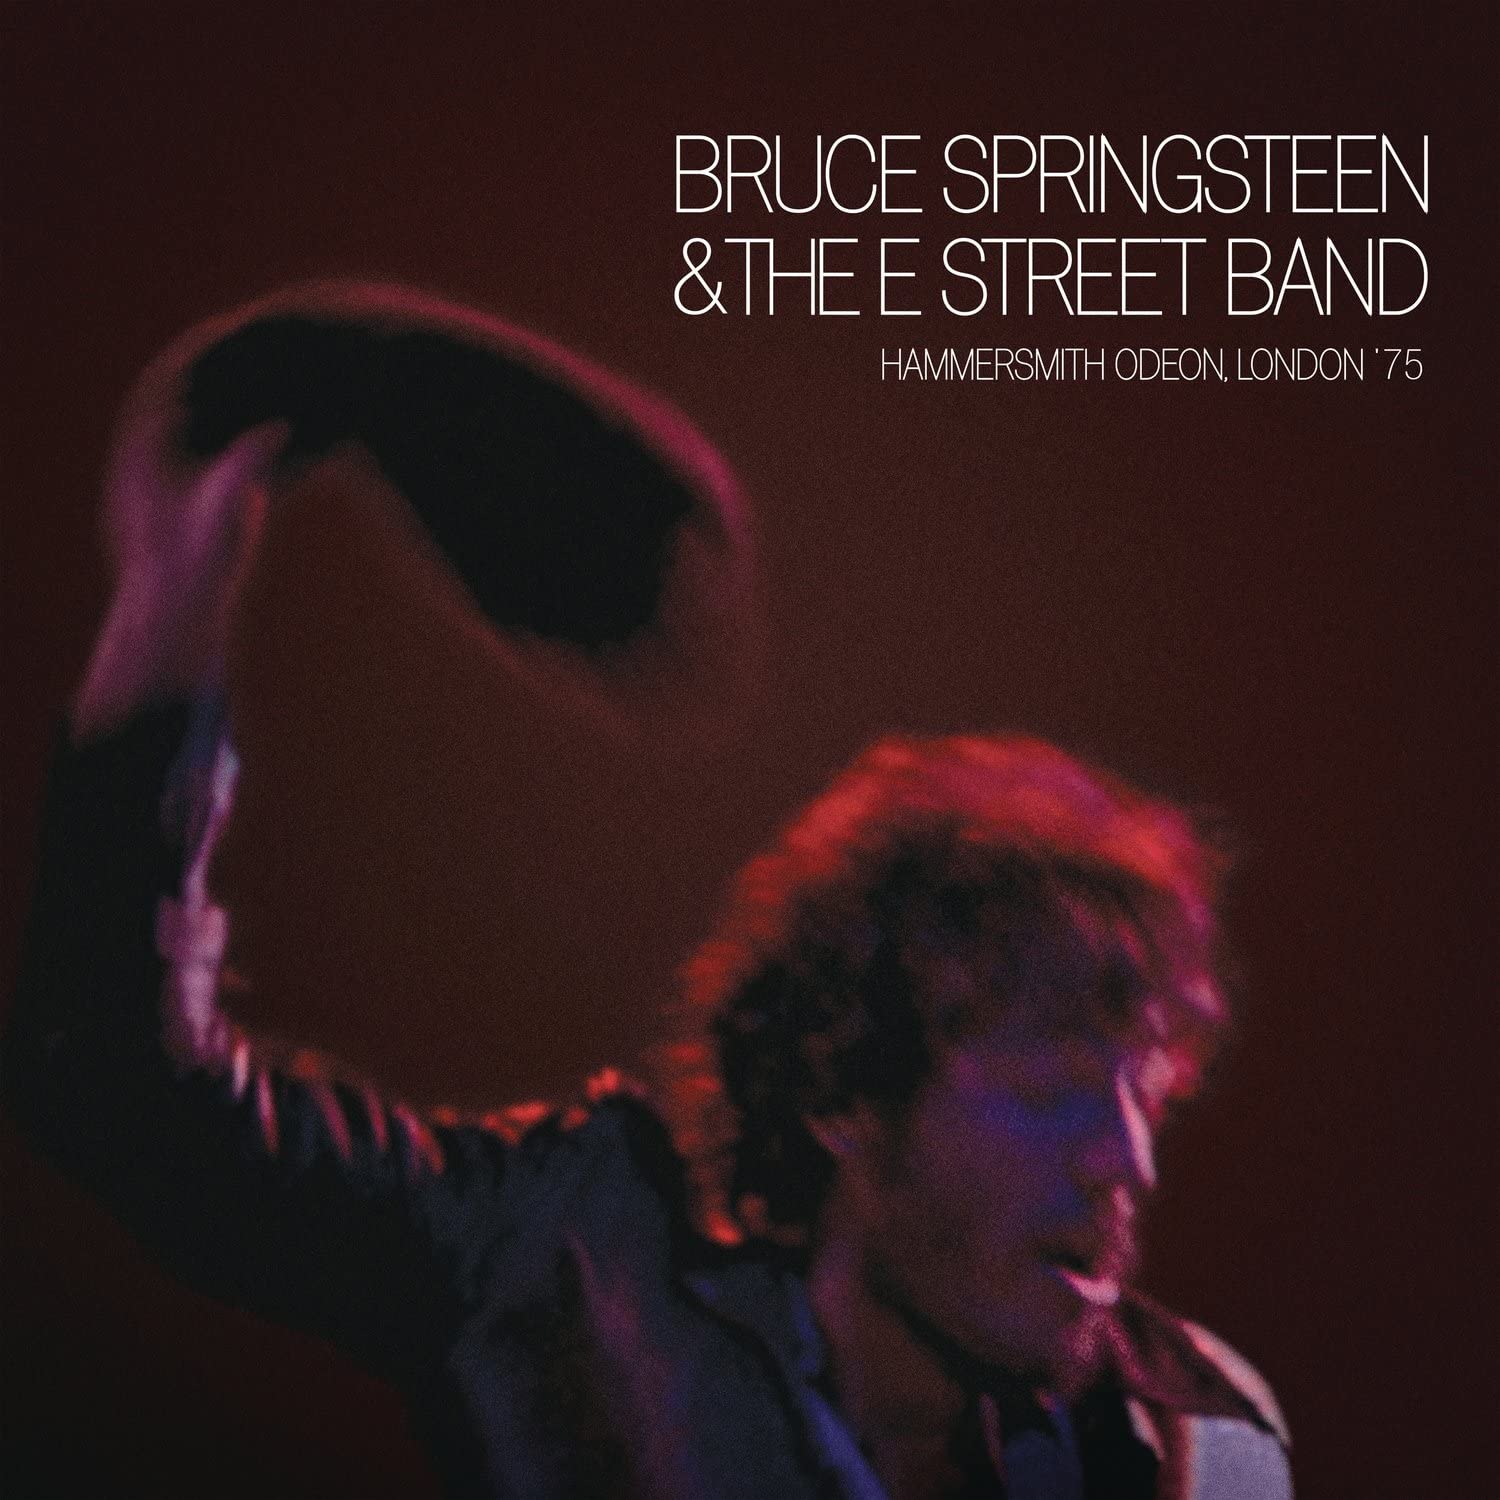 Bruce Springsteen & The E Street Band - Hammersmith Odeon, London \'75 - Vinyl | Bruce Springsteen, The E Street Band